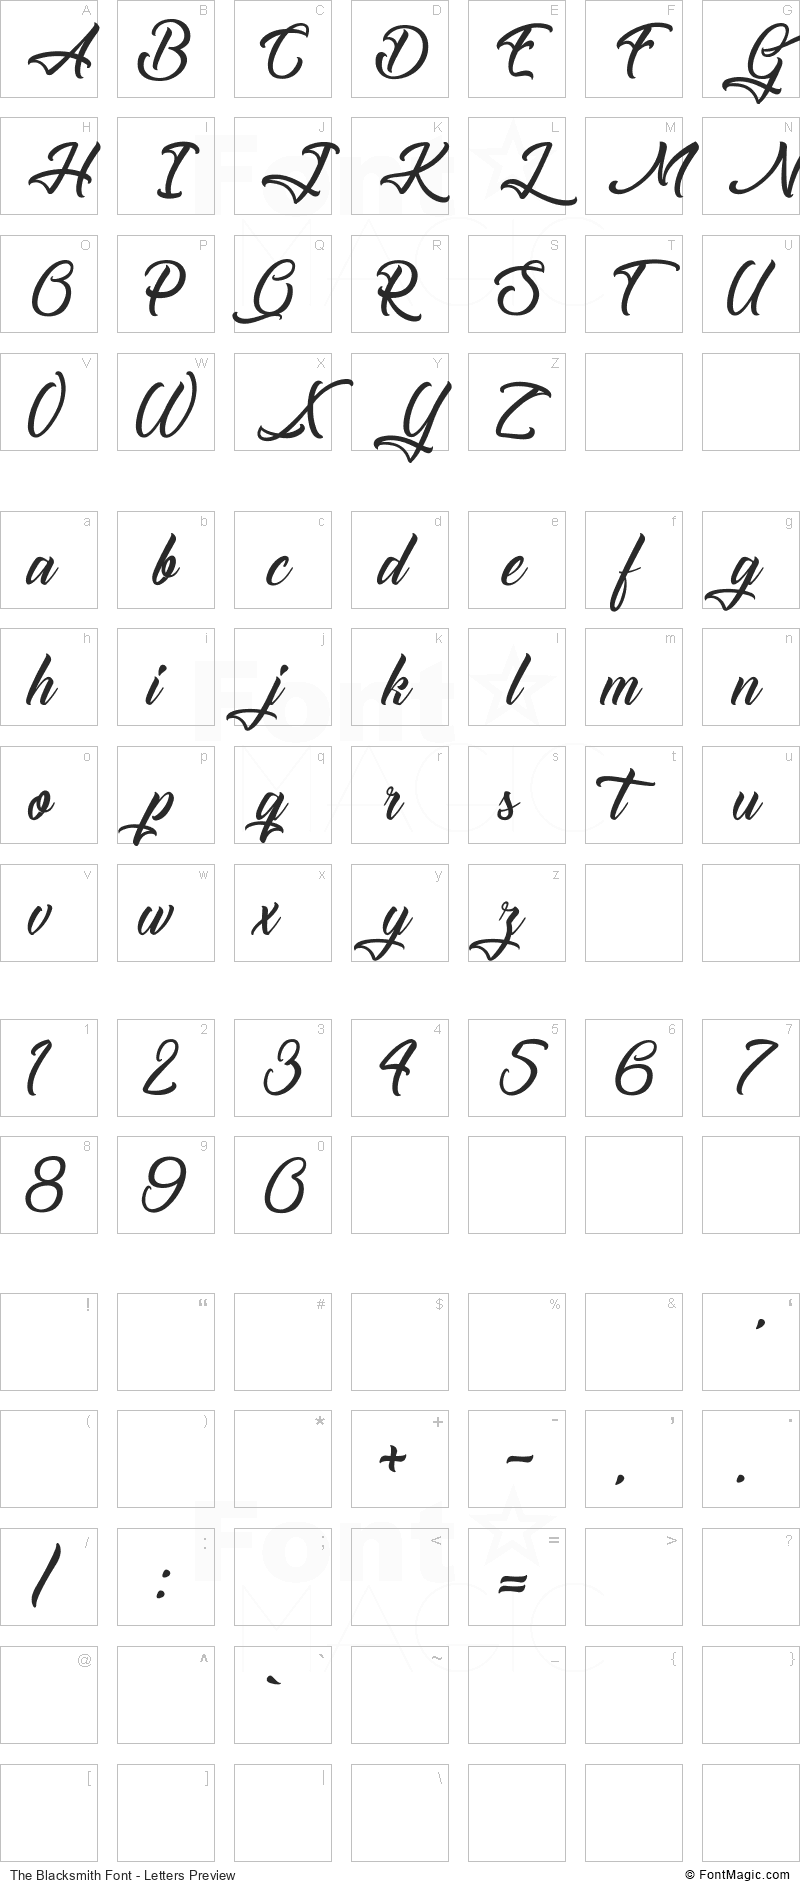 The Blacksmith Font - All Latters Preview Chart